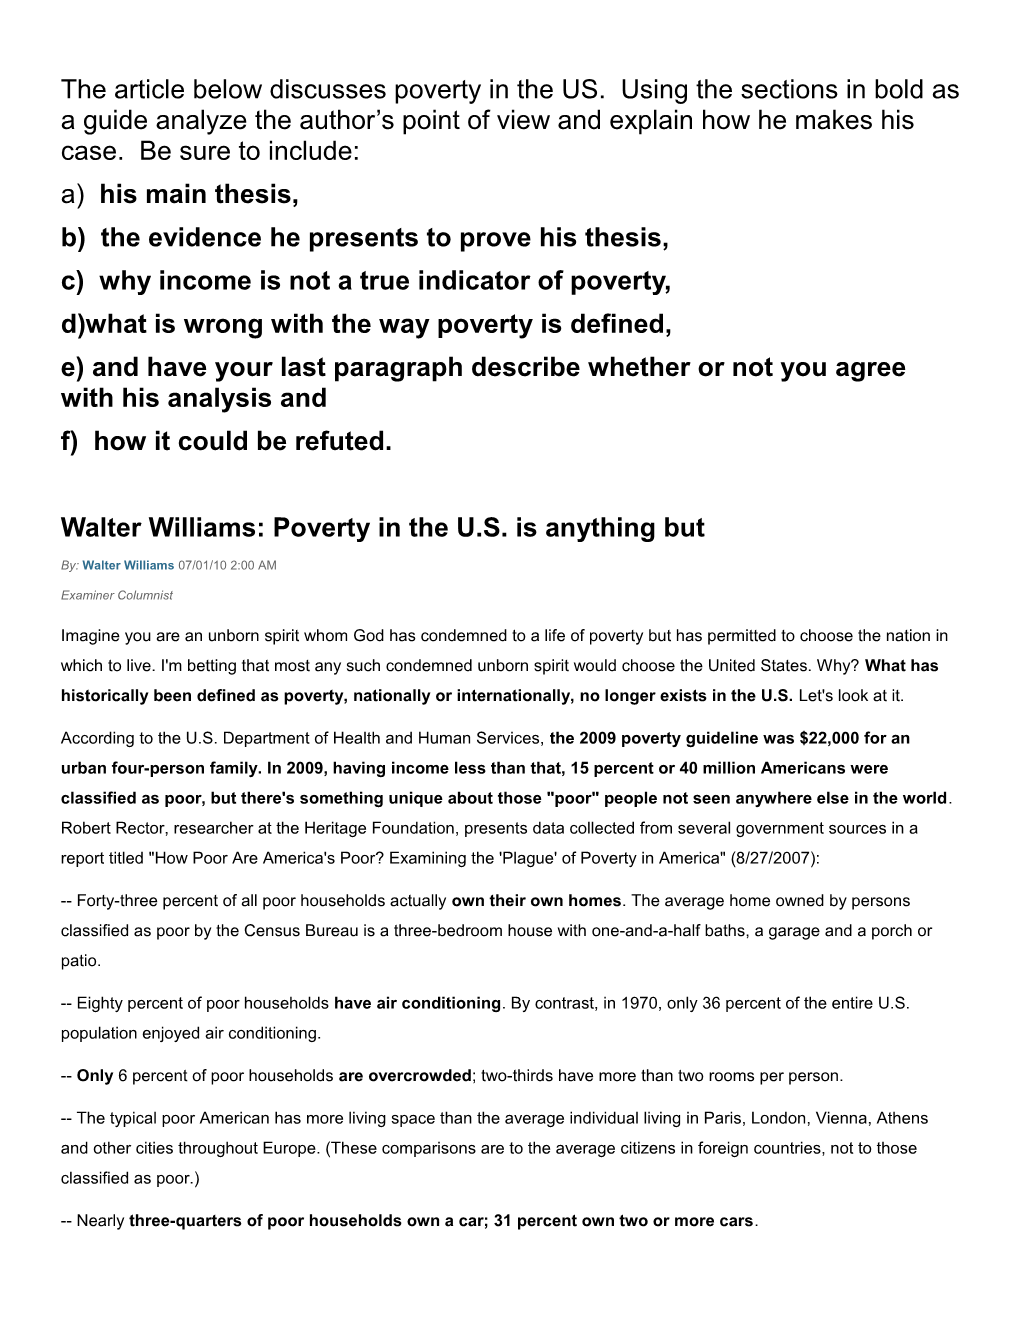 Walter Williams: Poverty in the U